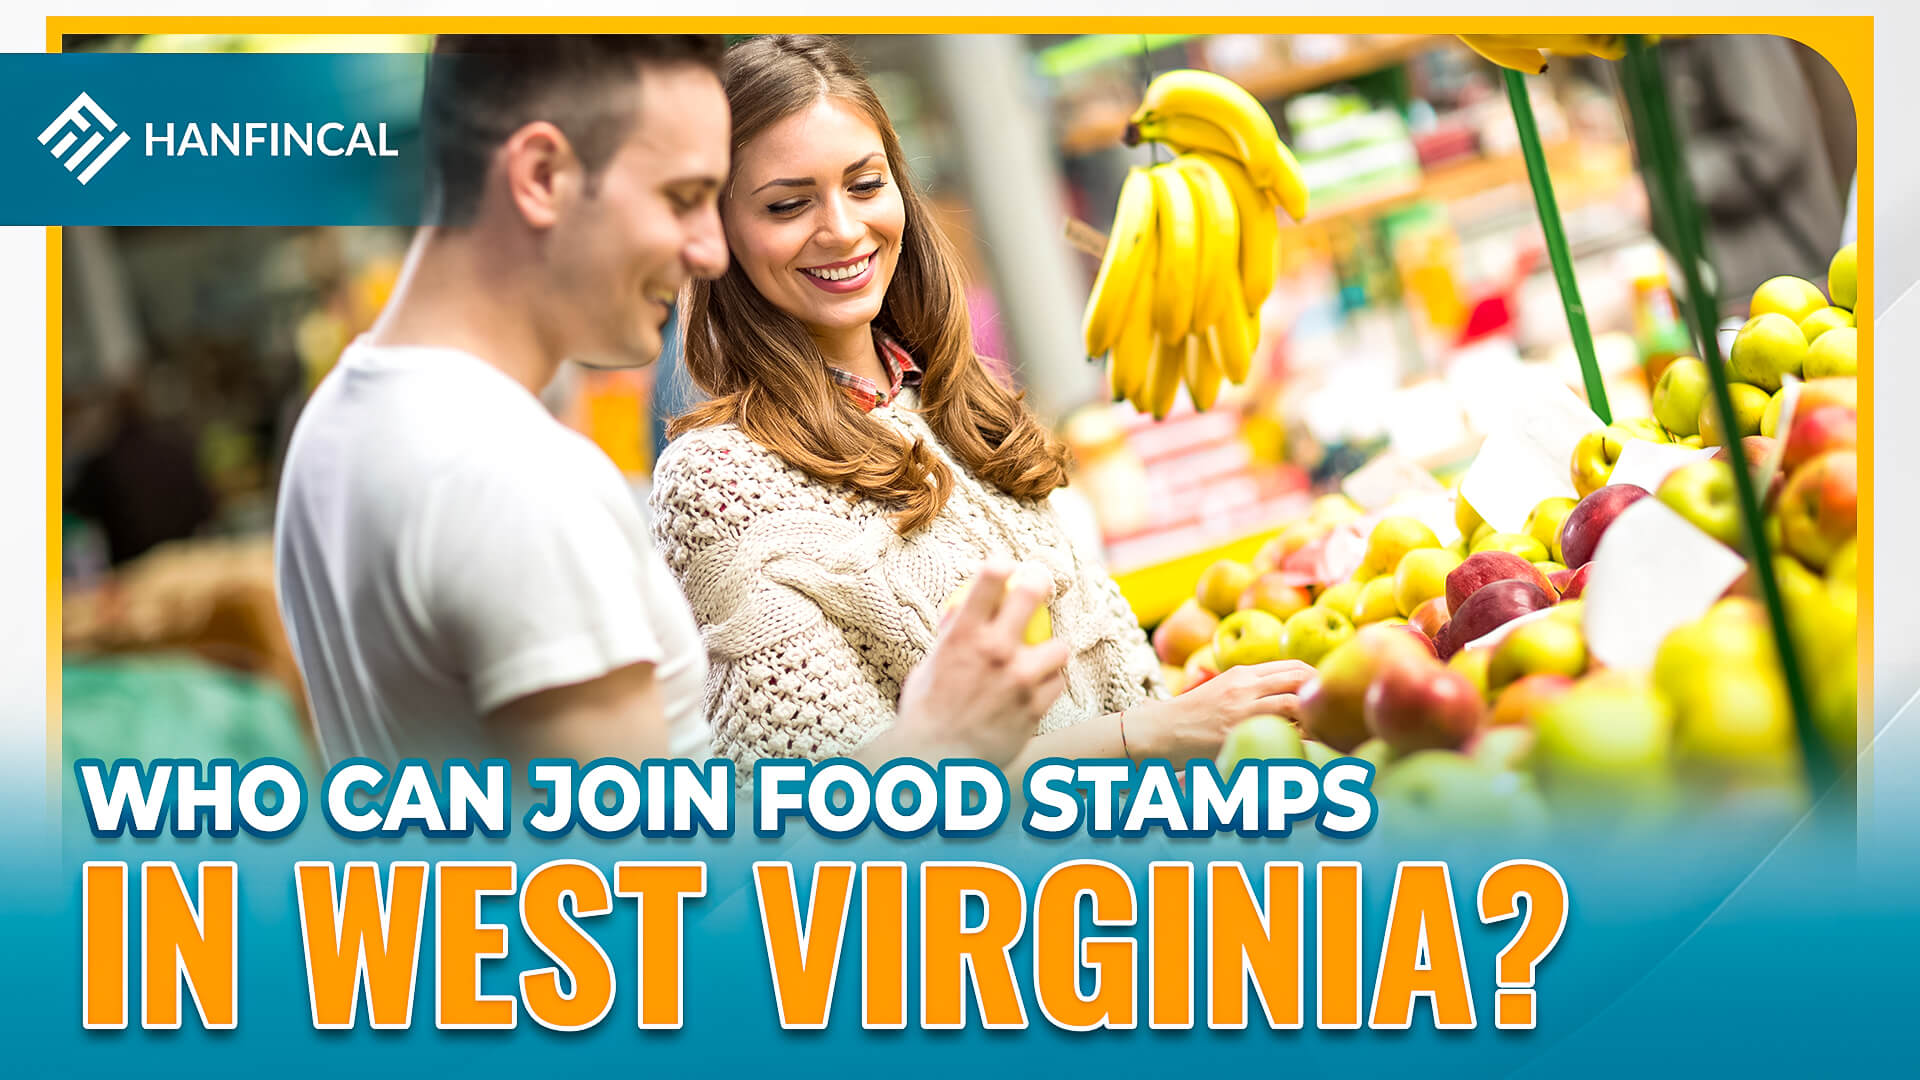 How To Apply For Food Stamps In West Virginia?